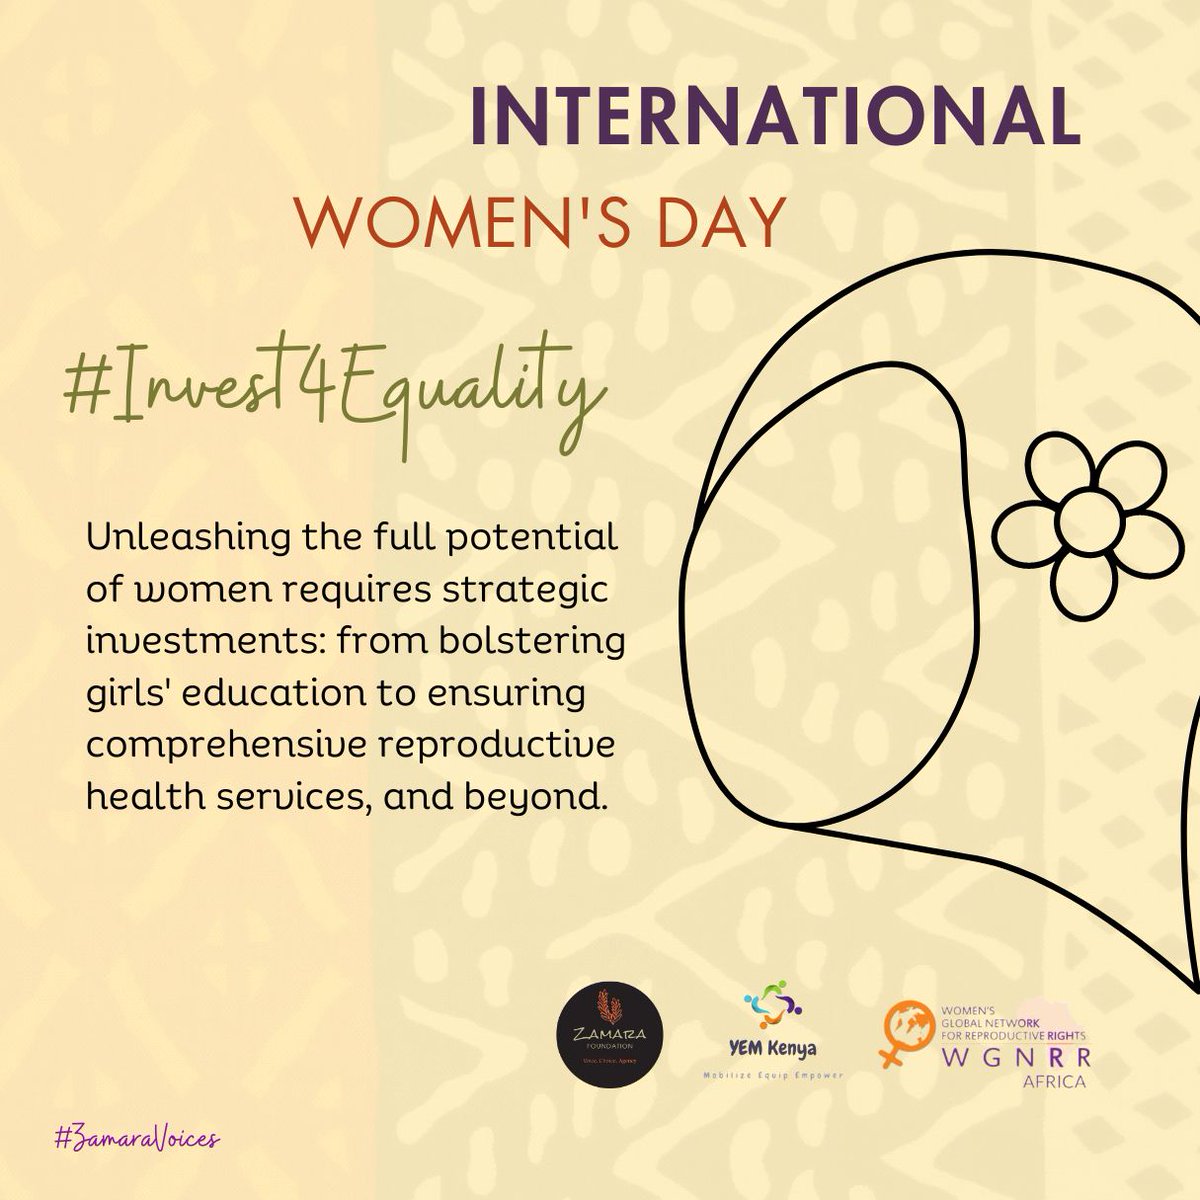 Recognize and address the specific challenges faced by marginalized women, such as women of color, LGBTQ+ women, women with disabilities, and immigrant women.#Invest4Equality 
 #ZamaraVoices 
@Zamara_fdn
@YEMKenya
@wgnrr_africa